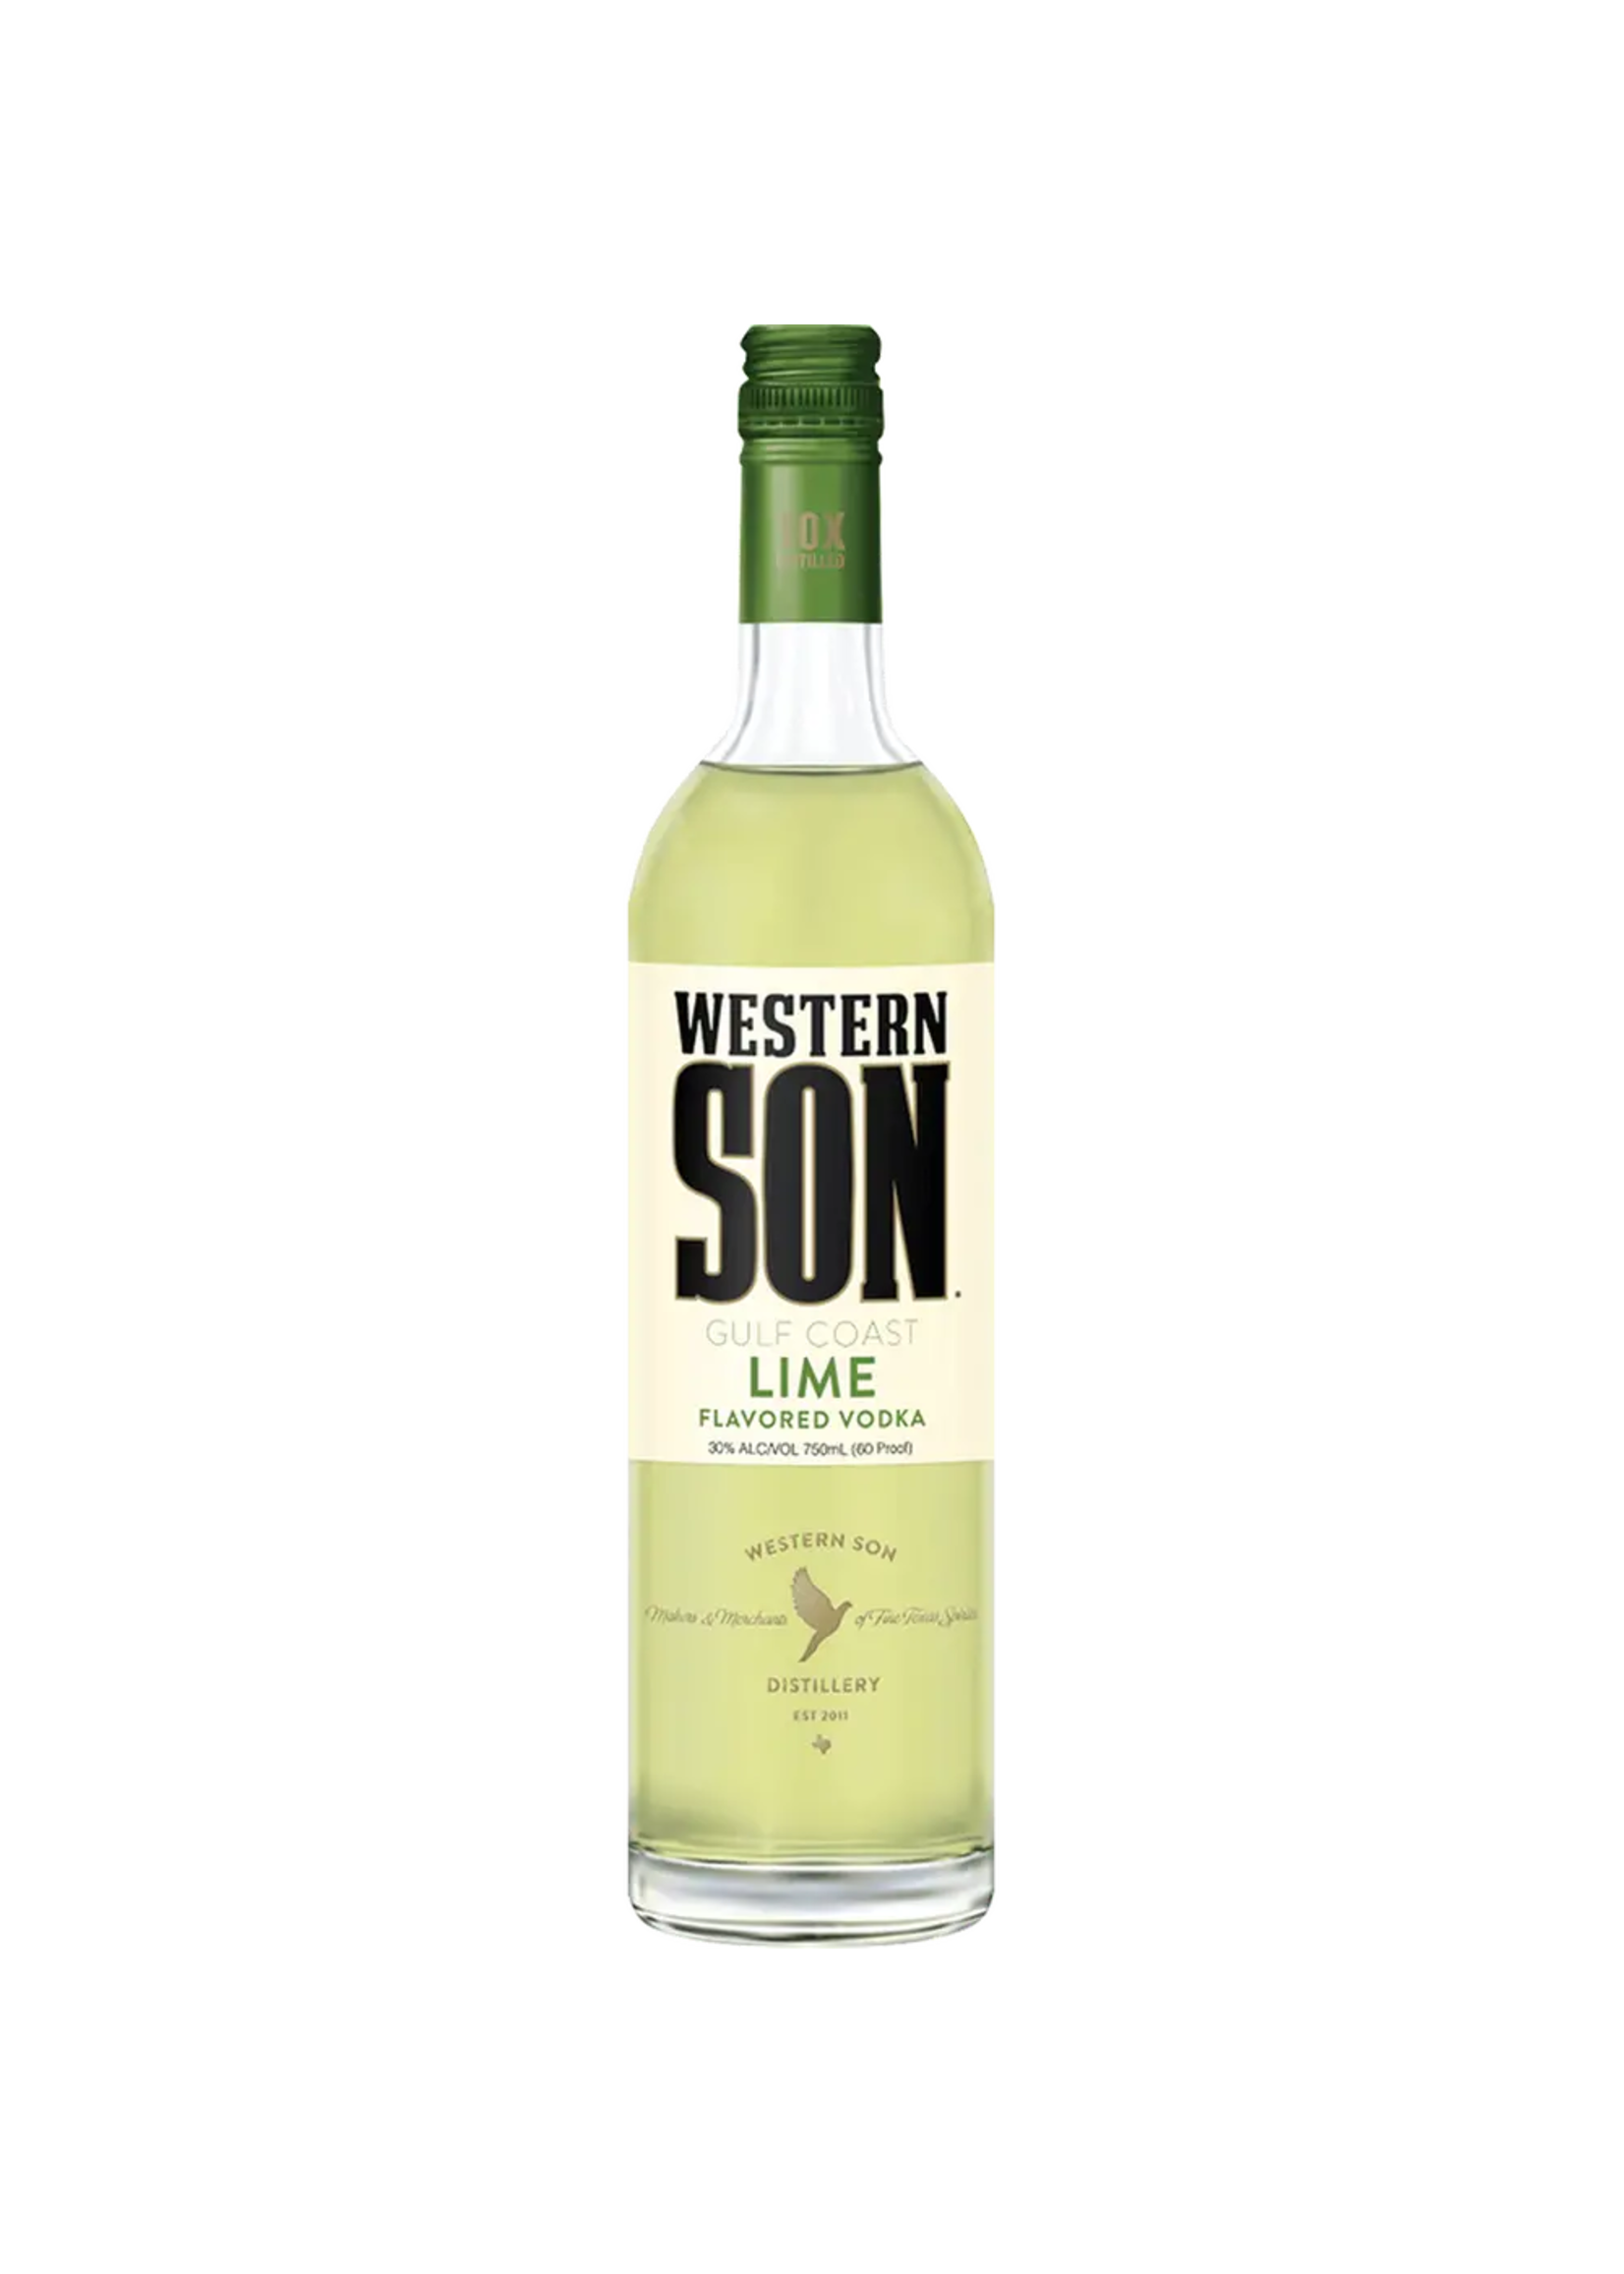 Western Son Western Son Lime Flavored Vodka 60Proof 750ml